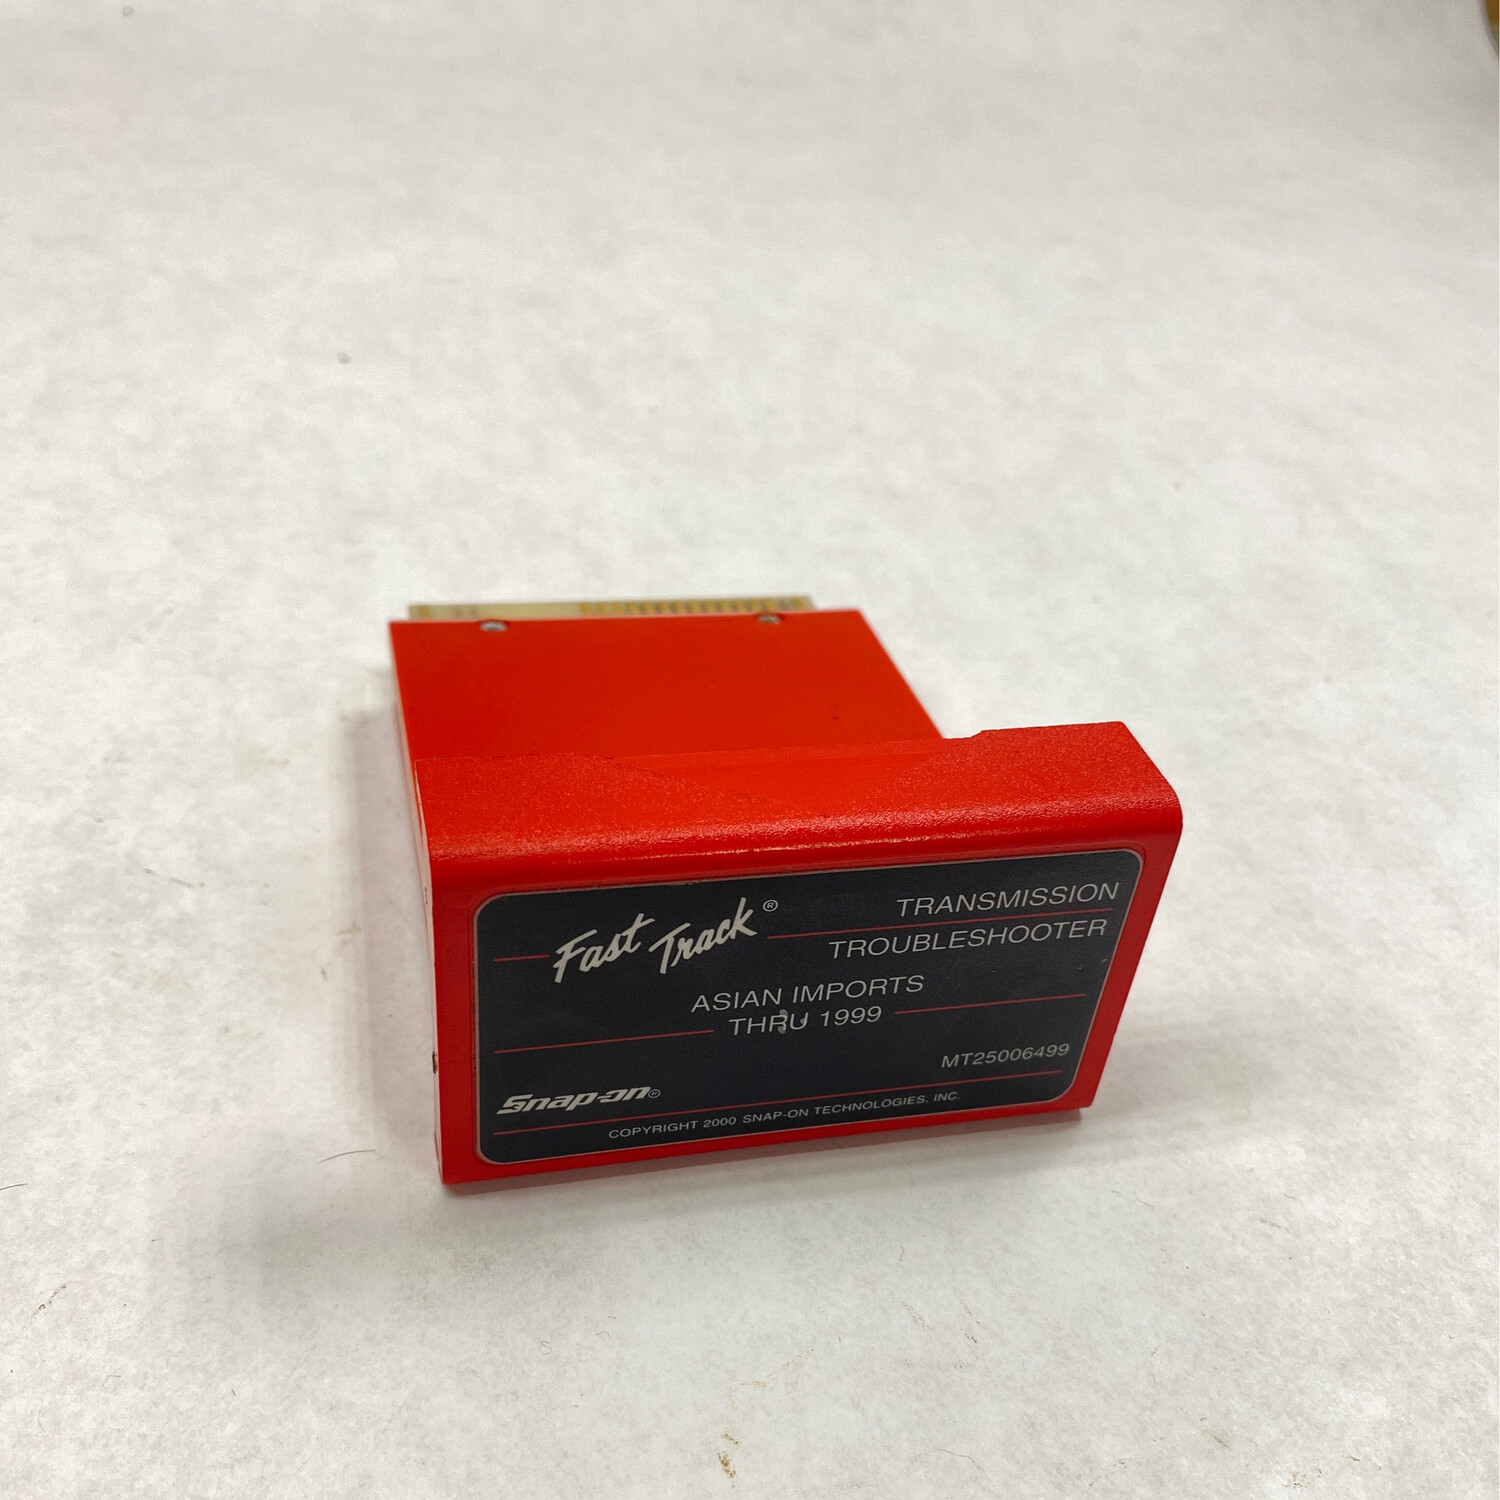 Snap On Transmission Troubleshooter Cartridge- Asian Imports Through 1999, MT2500-6499